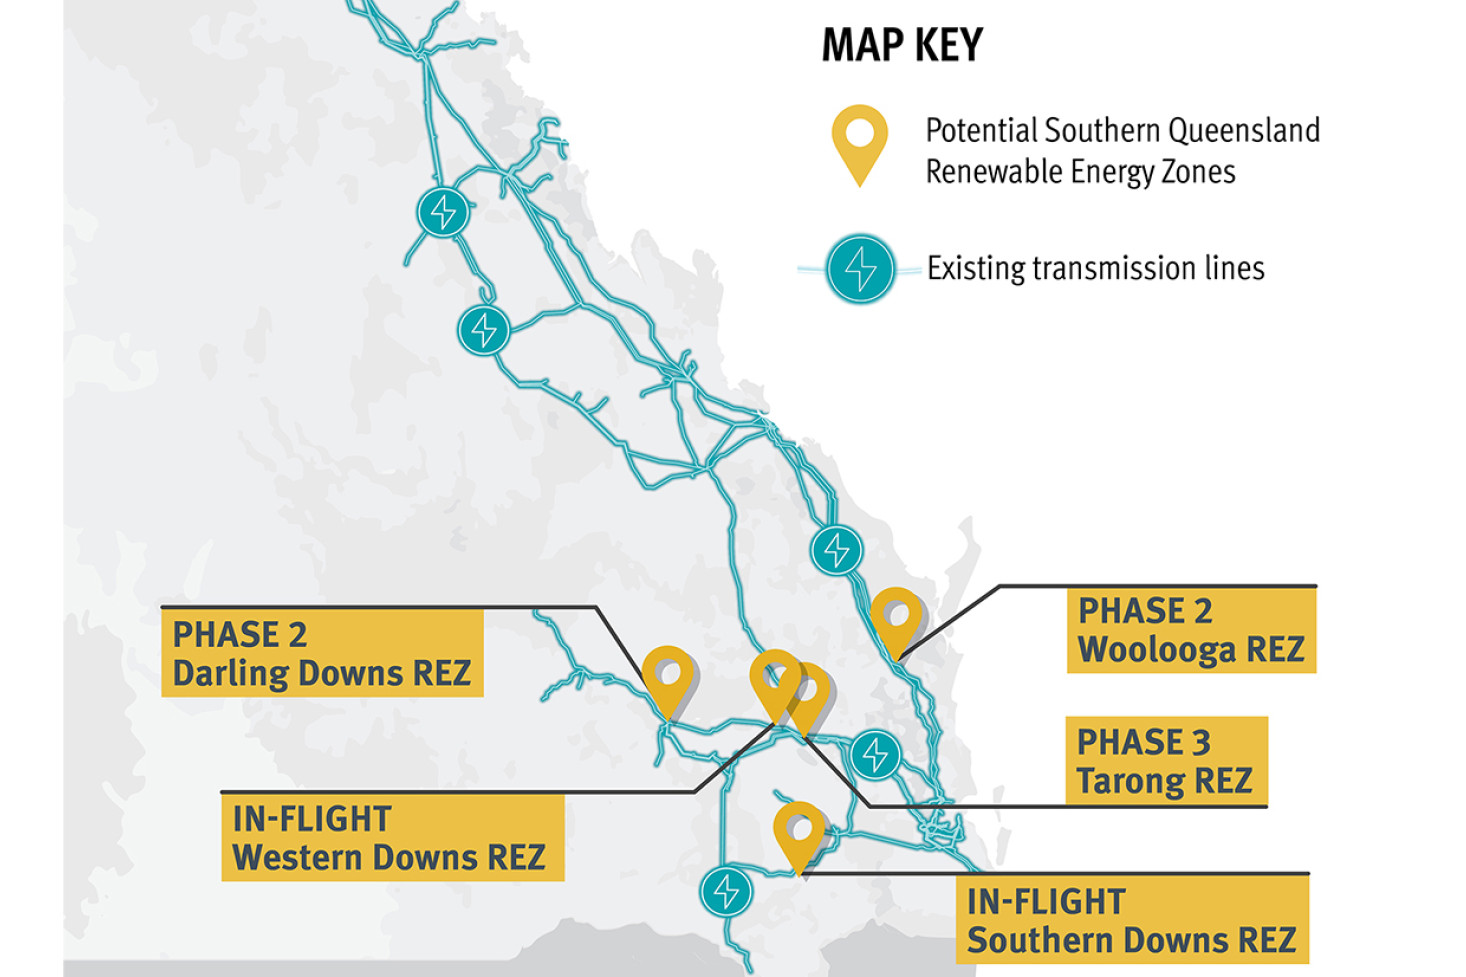 The closest Renewable Energy Zone is Southern Downs, which will connect to the Macintyre Wind Farm.